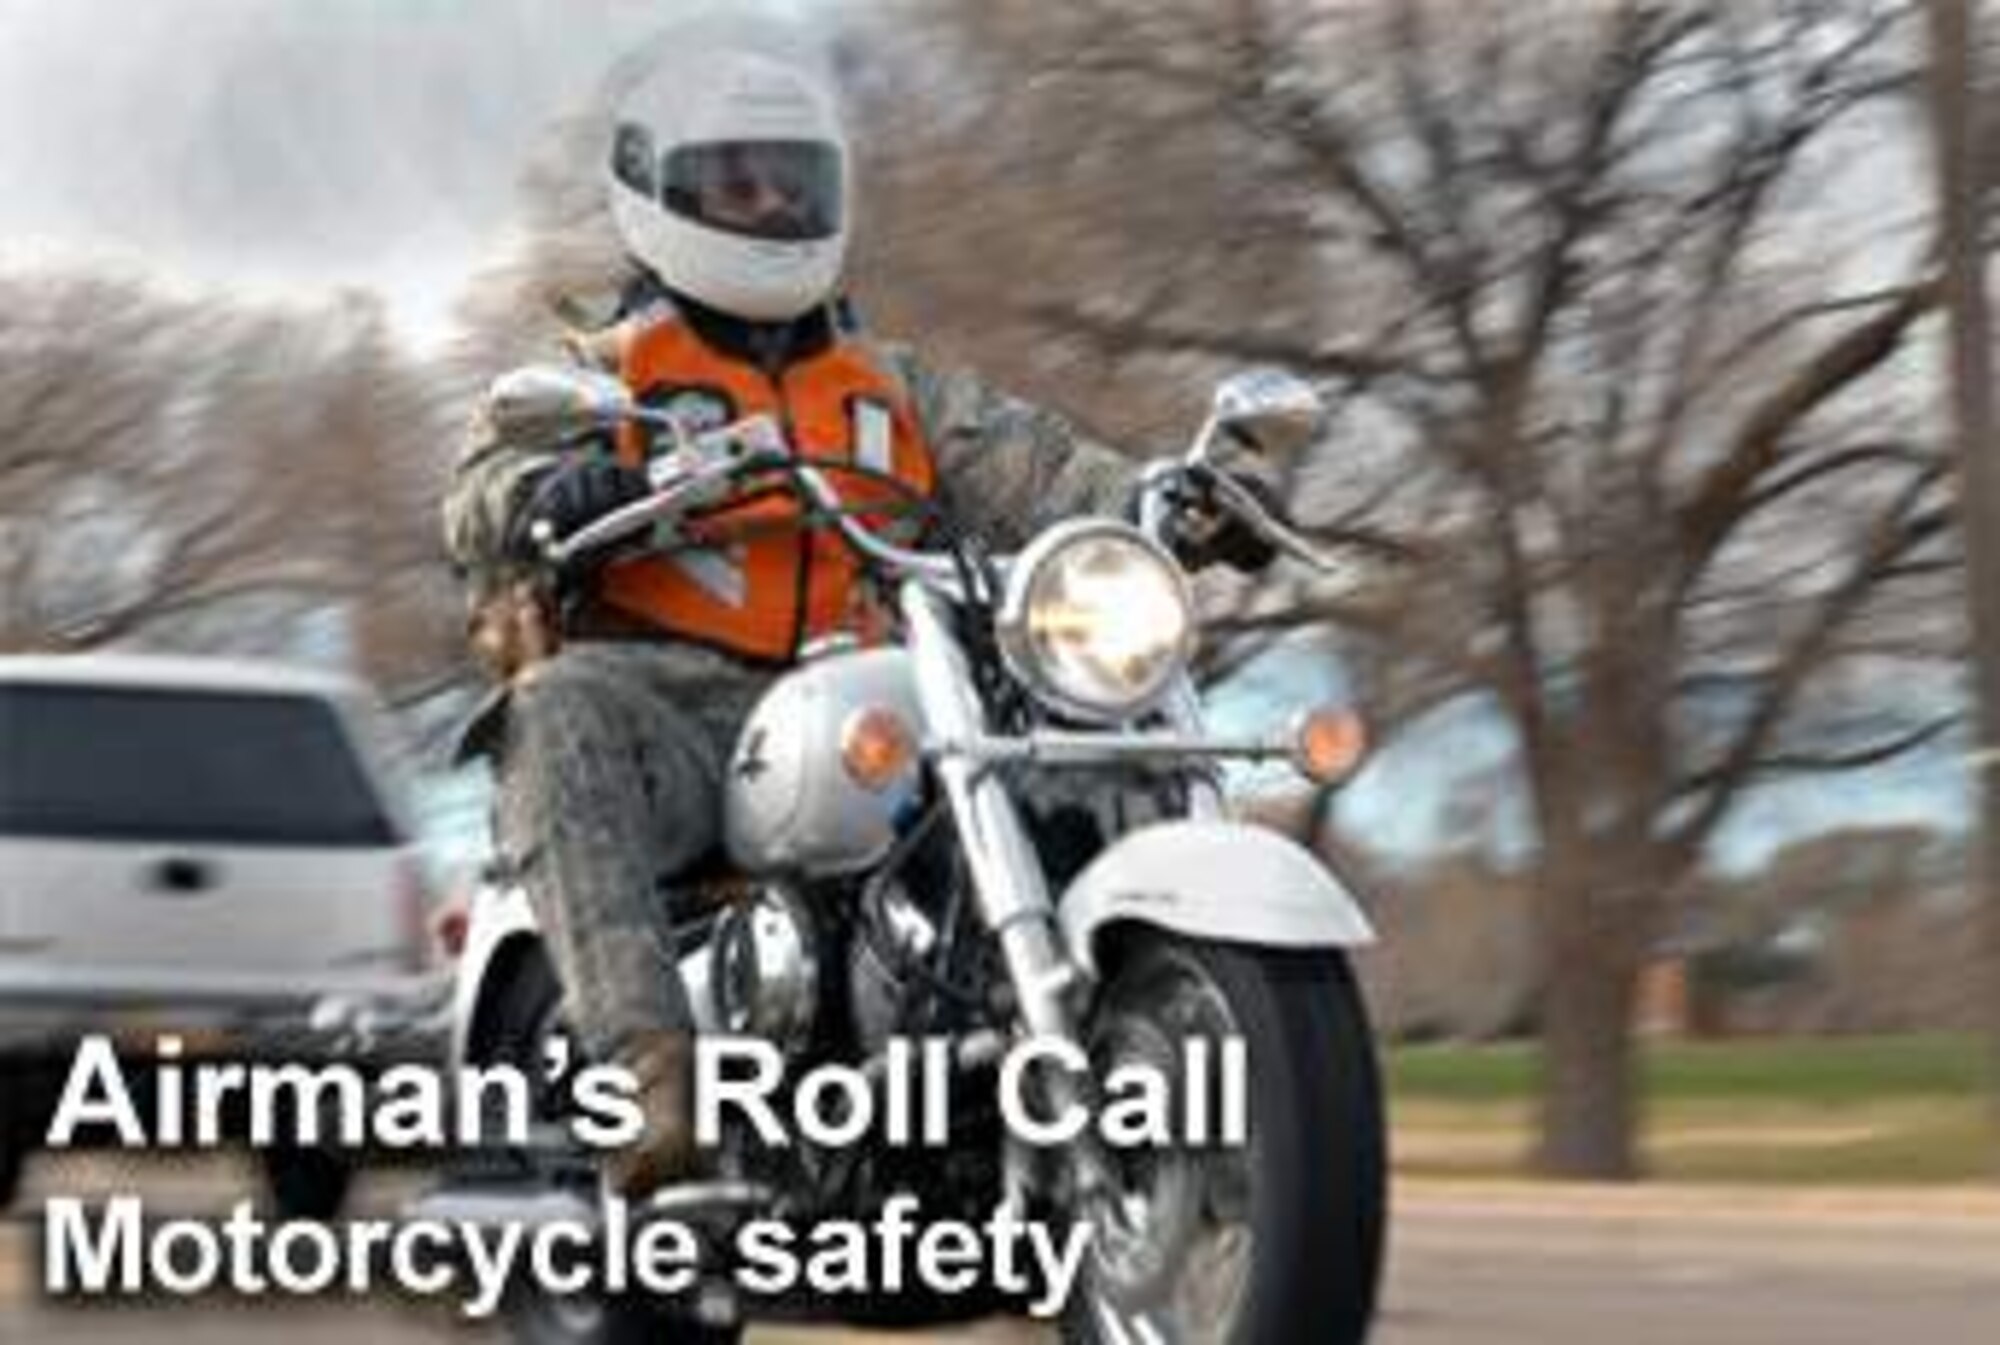 This week's Airman's Roll Call focuses on the spring spike focus. Research conducted by the Air Force Safety Center has shown motorcycle mishaps double in the springtime. (U.S. Air Force photo illustration) 